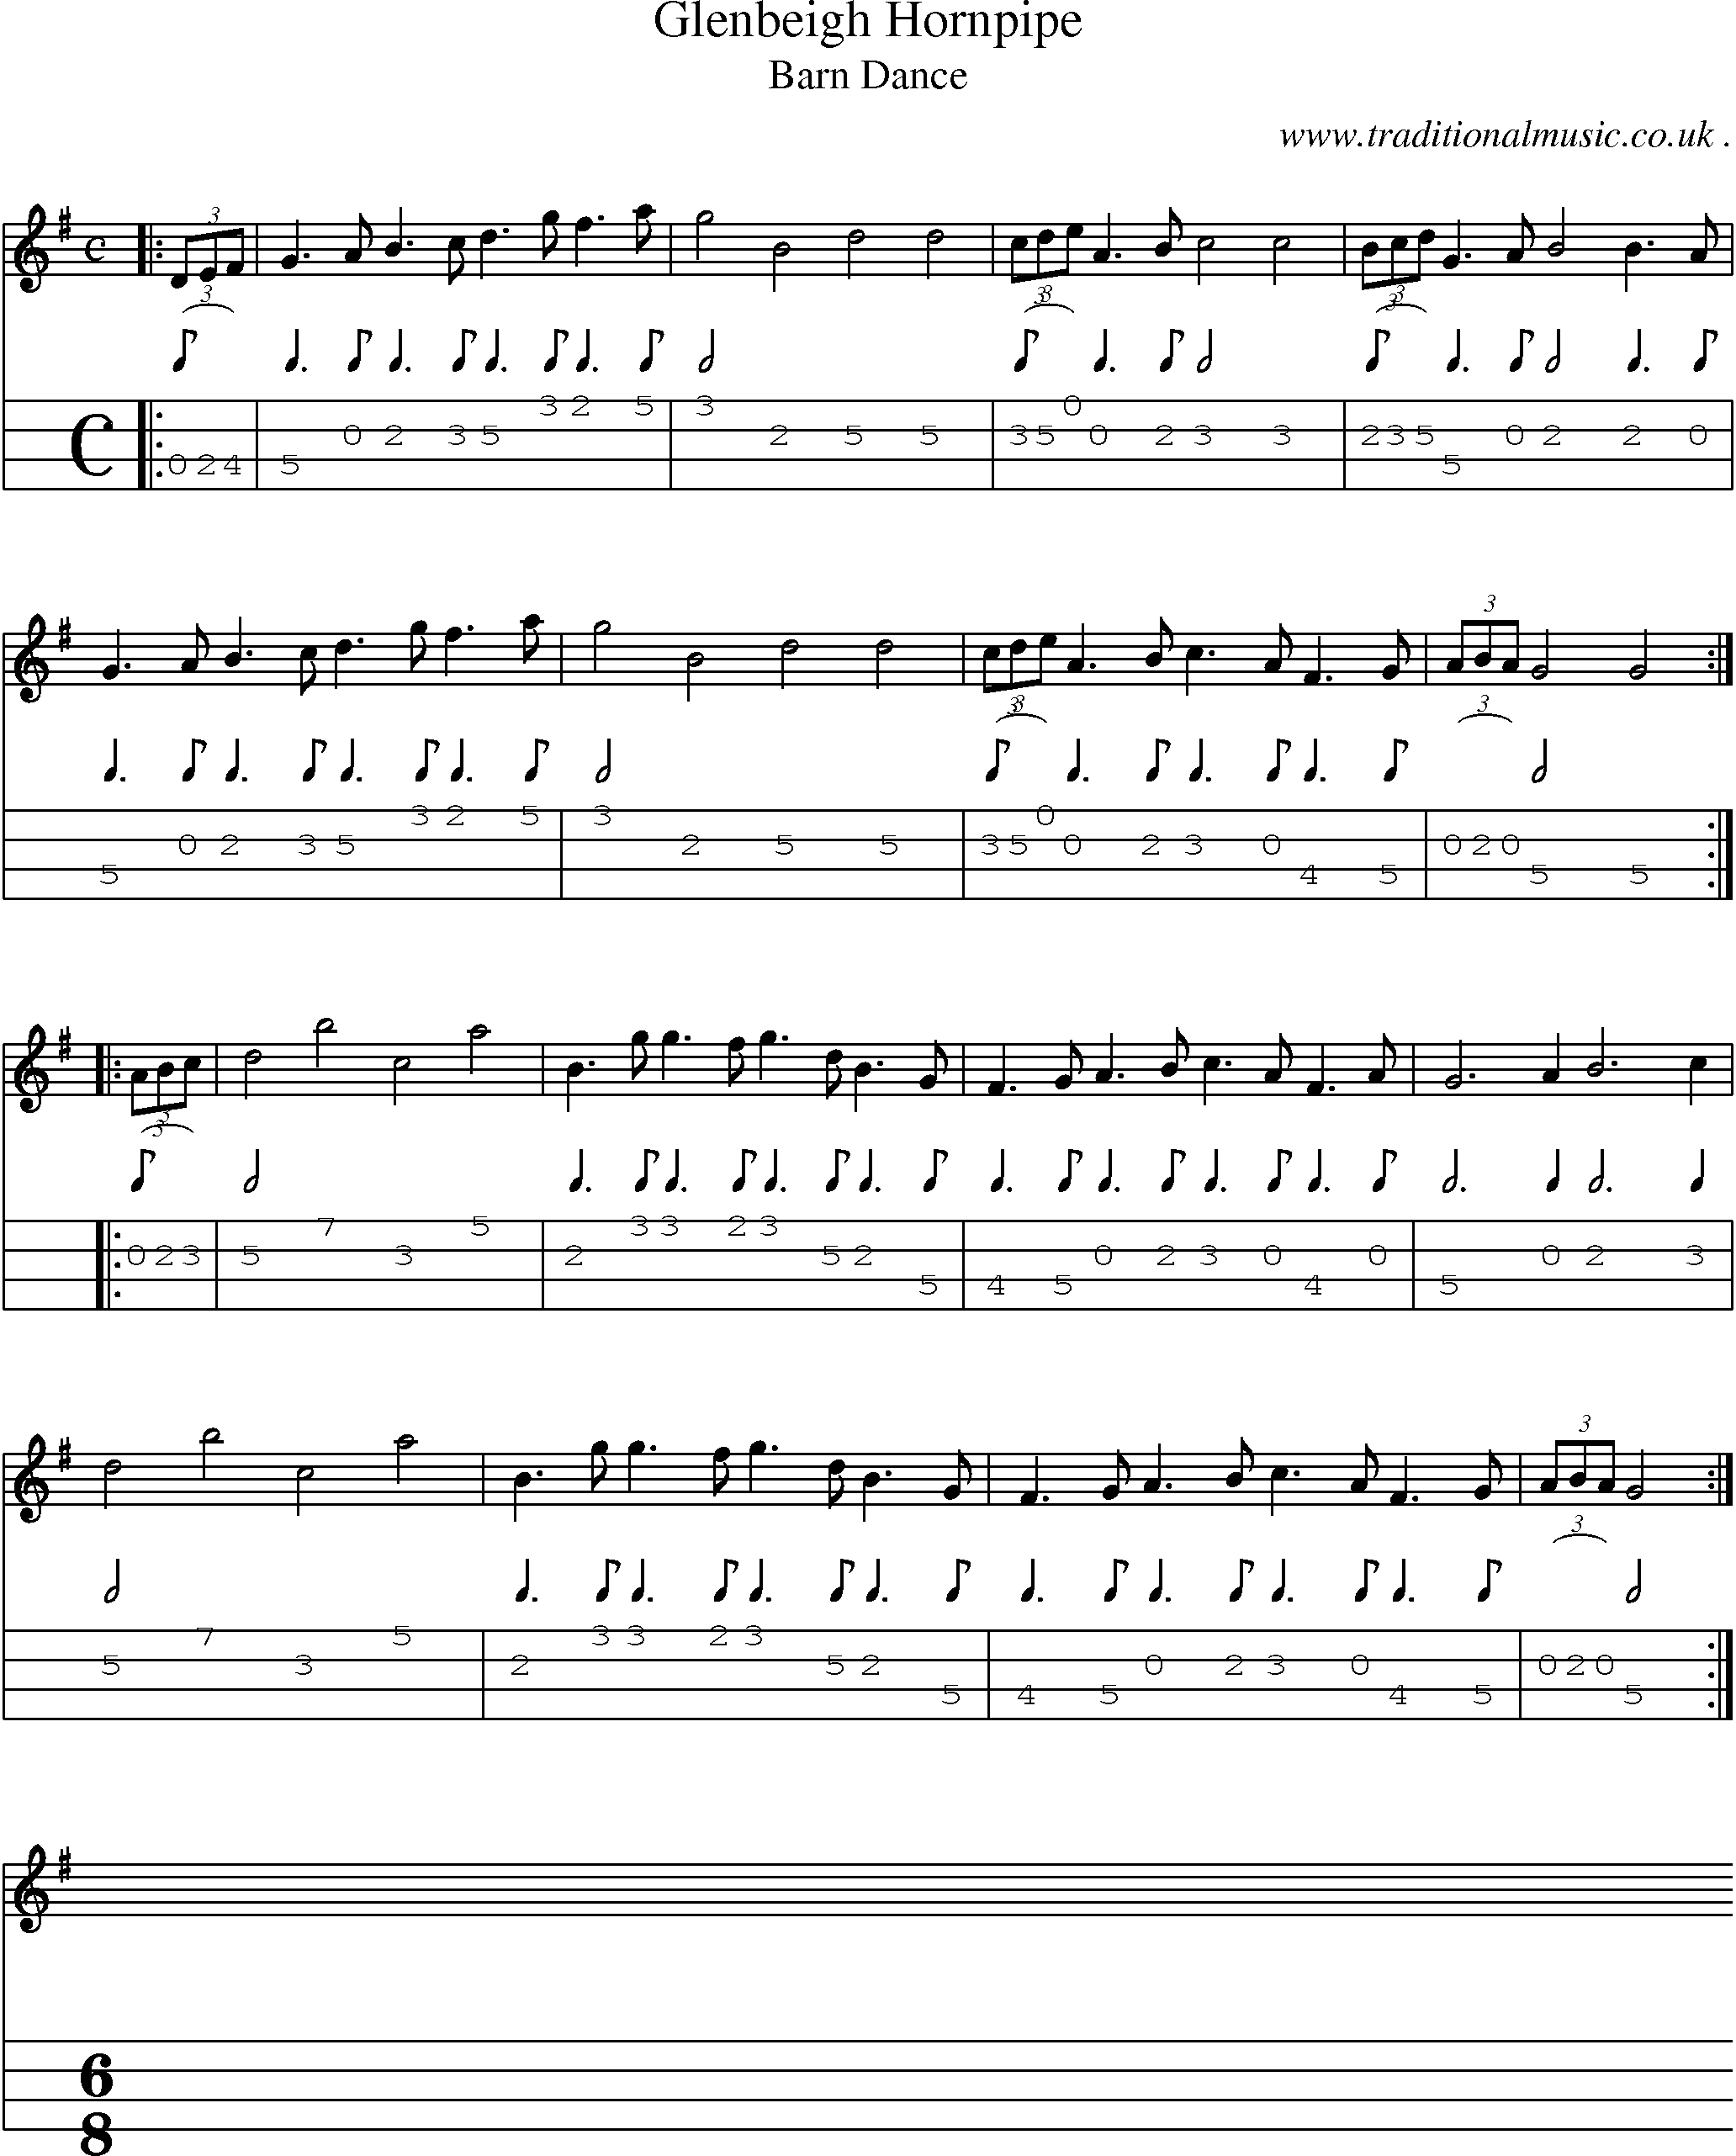 Sheet-Music and Mandolin Tabs for Glenbeigh Hornpipe